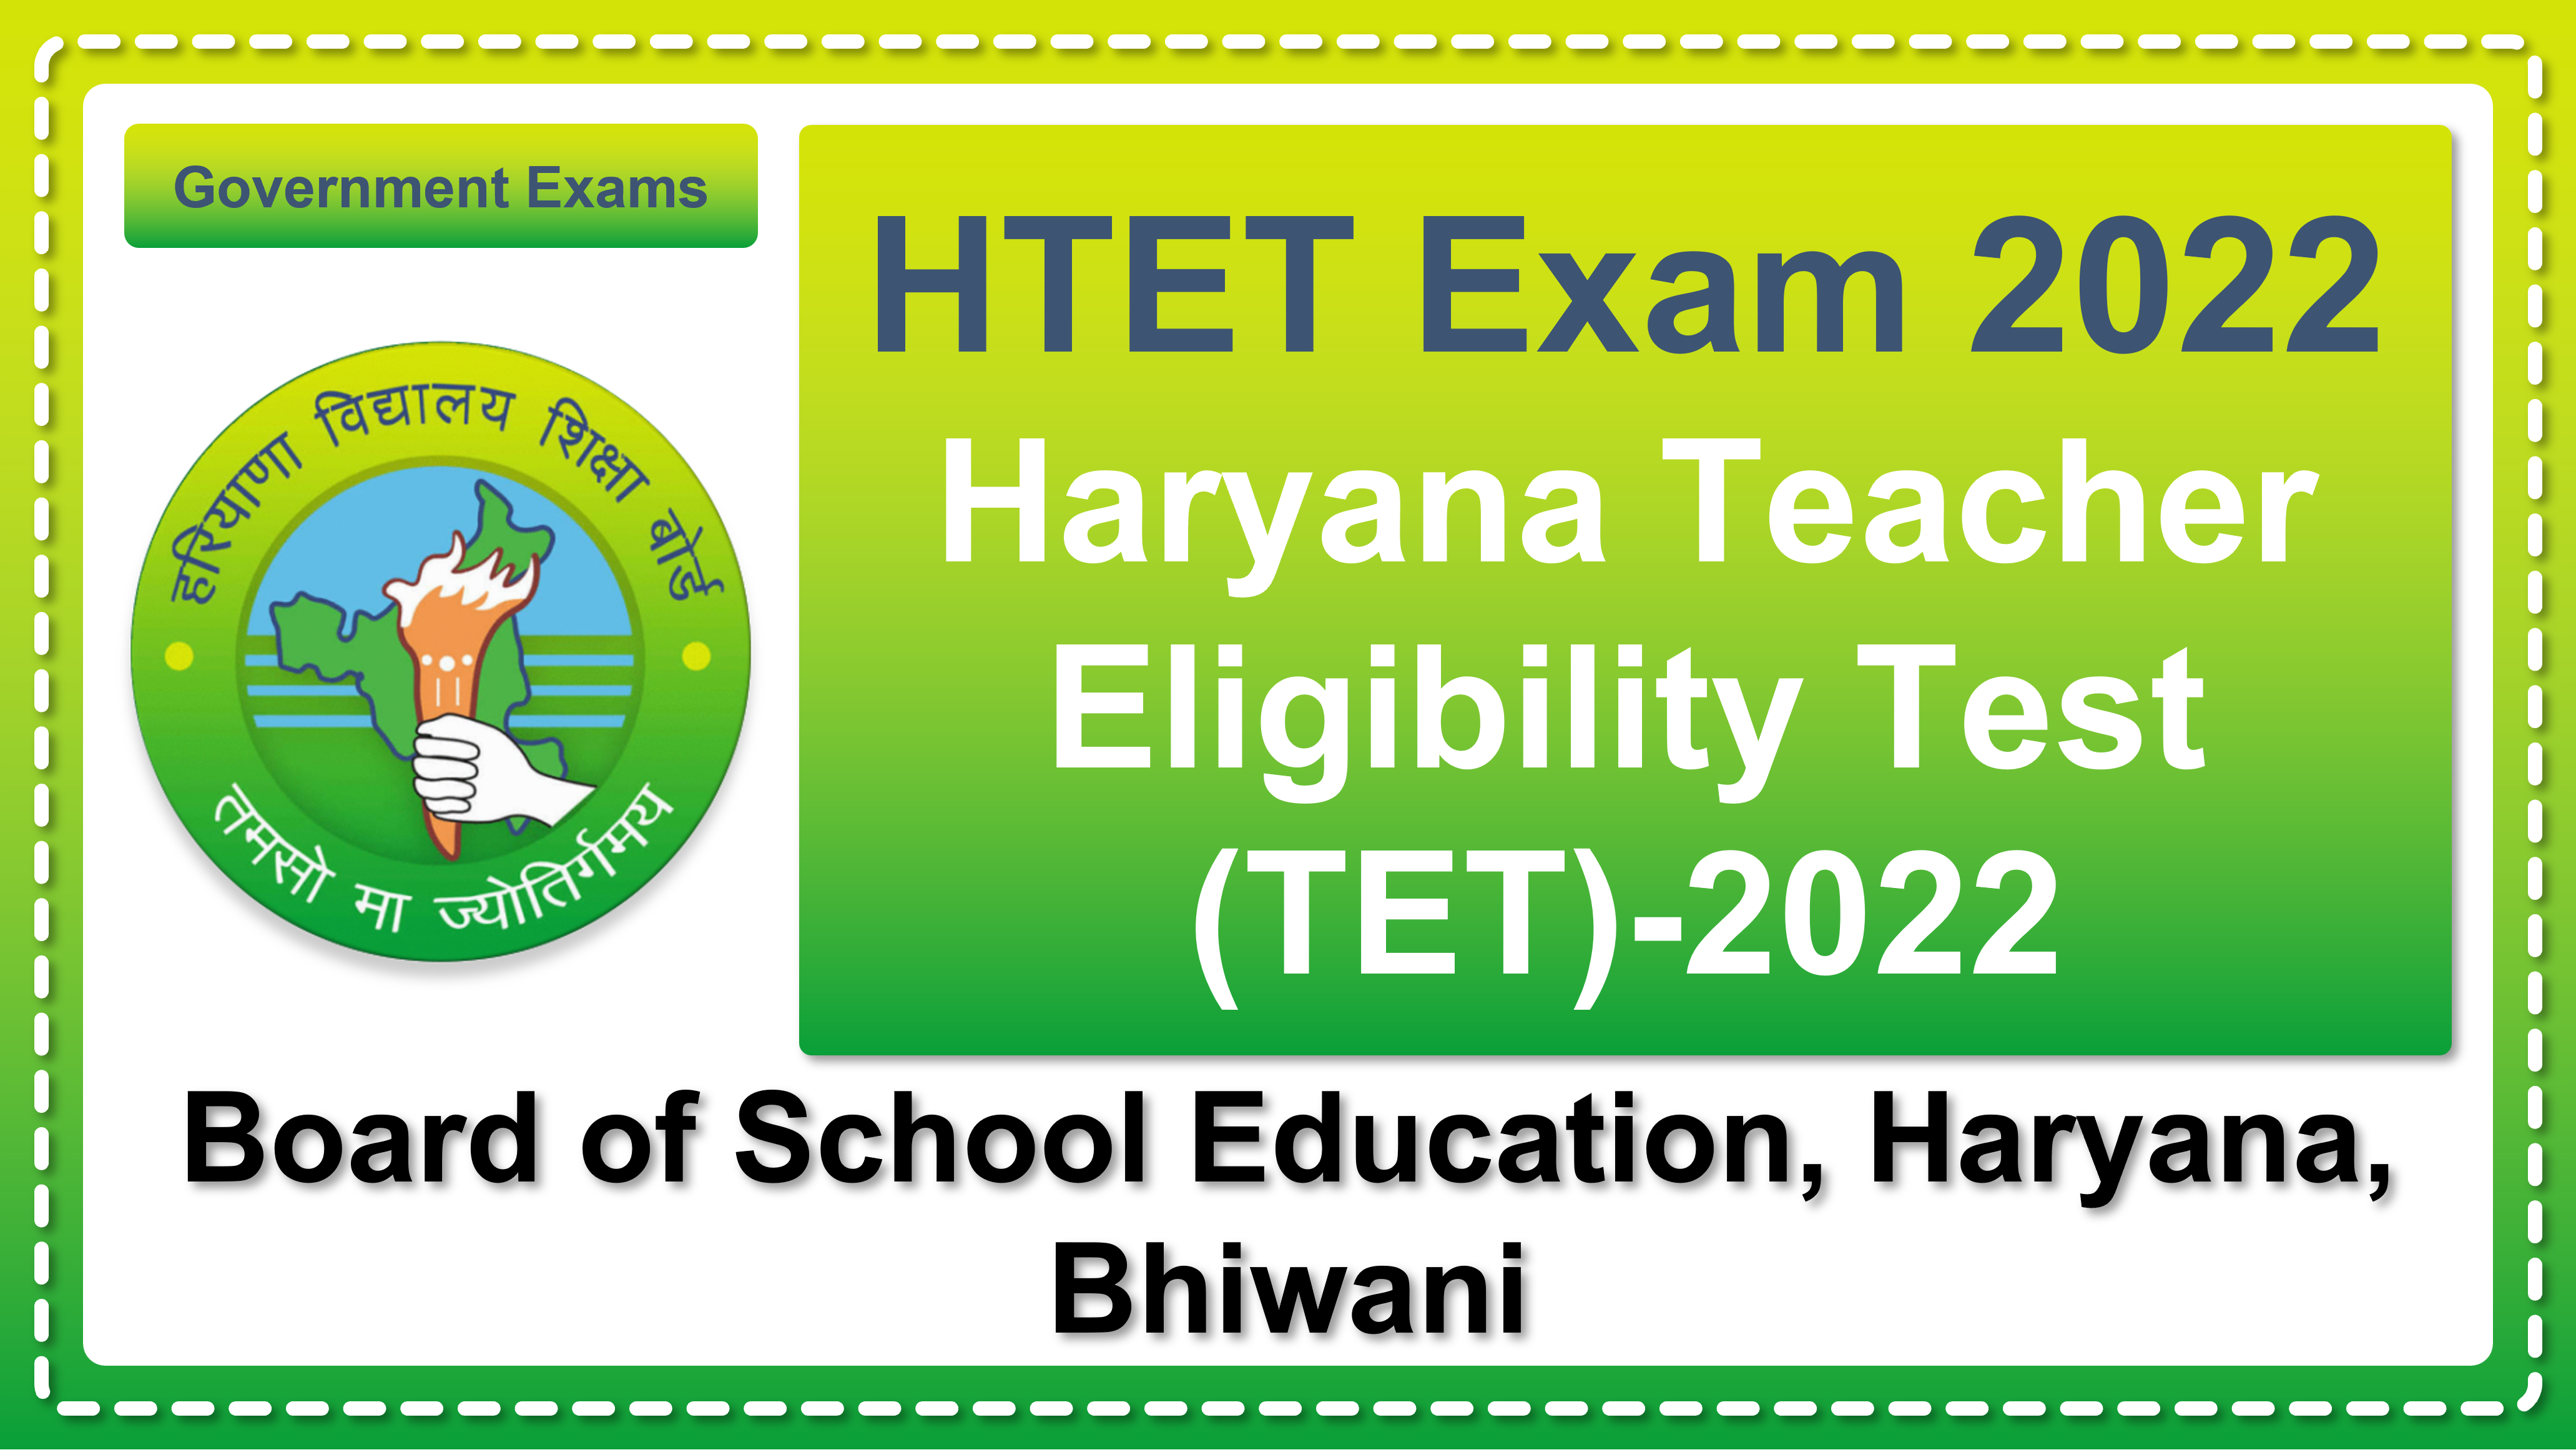 haryanatet.in | Board of School Education, Haryana, Bhiwani | Details of Examination Rules, Important Dates, Eligibility Criteria, Fee, How to Apply etc. | Board of School Education, Haryana, Bhiwani